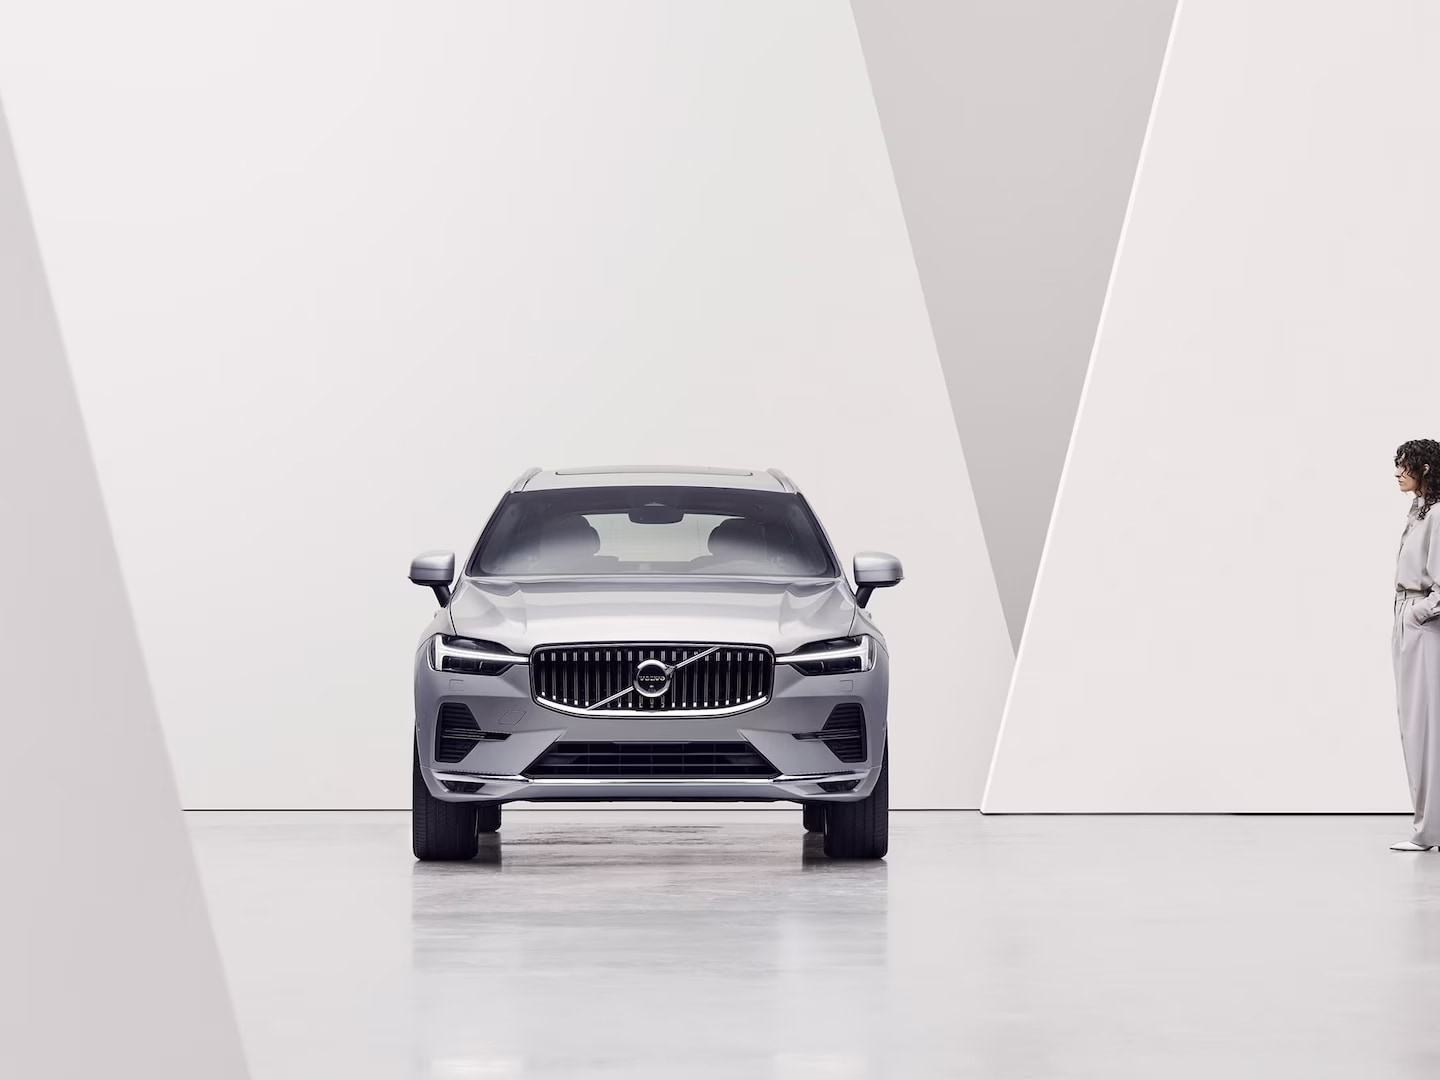 Front exterior of Volvo XC60 with the iconic front grille and headlamp design.